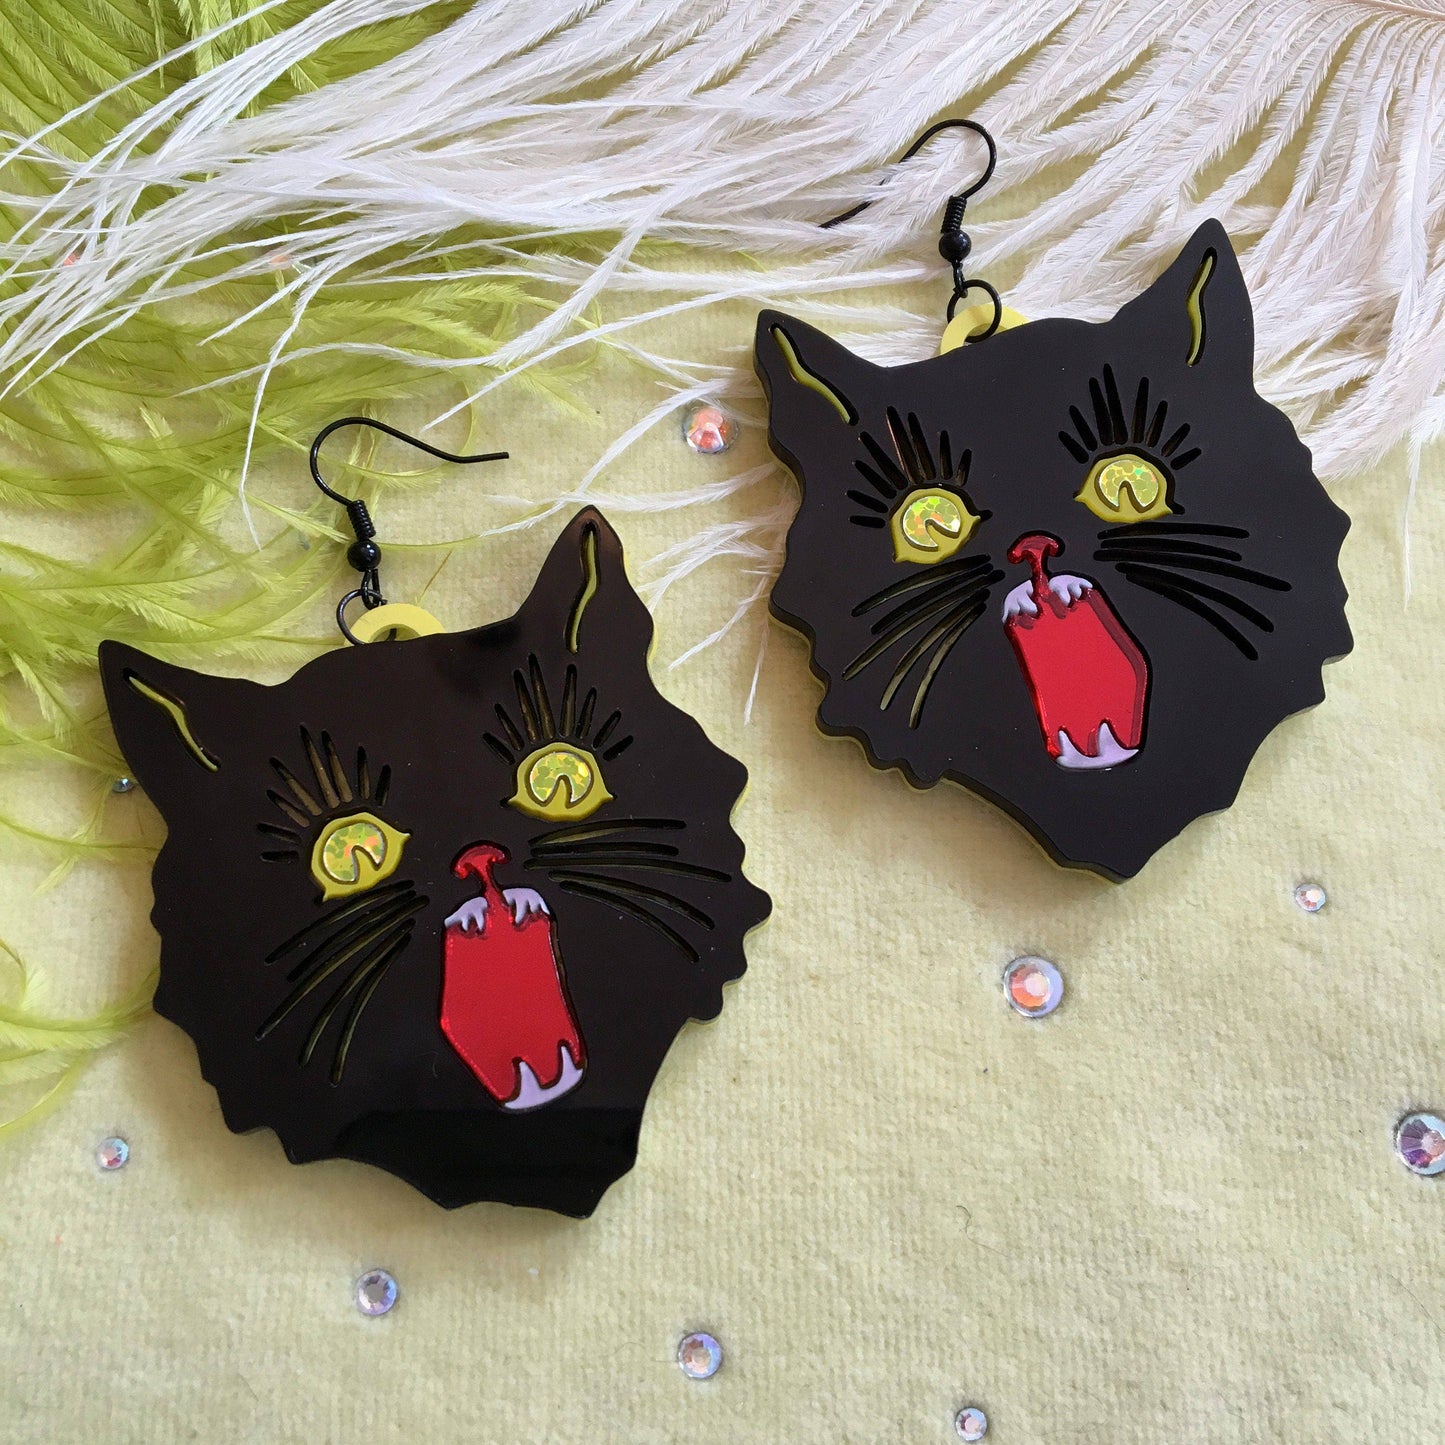 I'm Your Present - Scary Cat Earrings, Laser Cut Acrylic, Plastic Jewelry